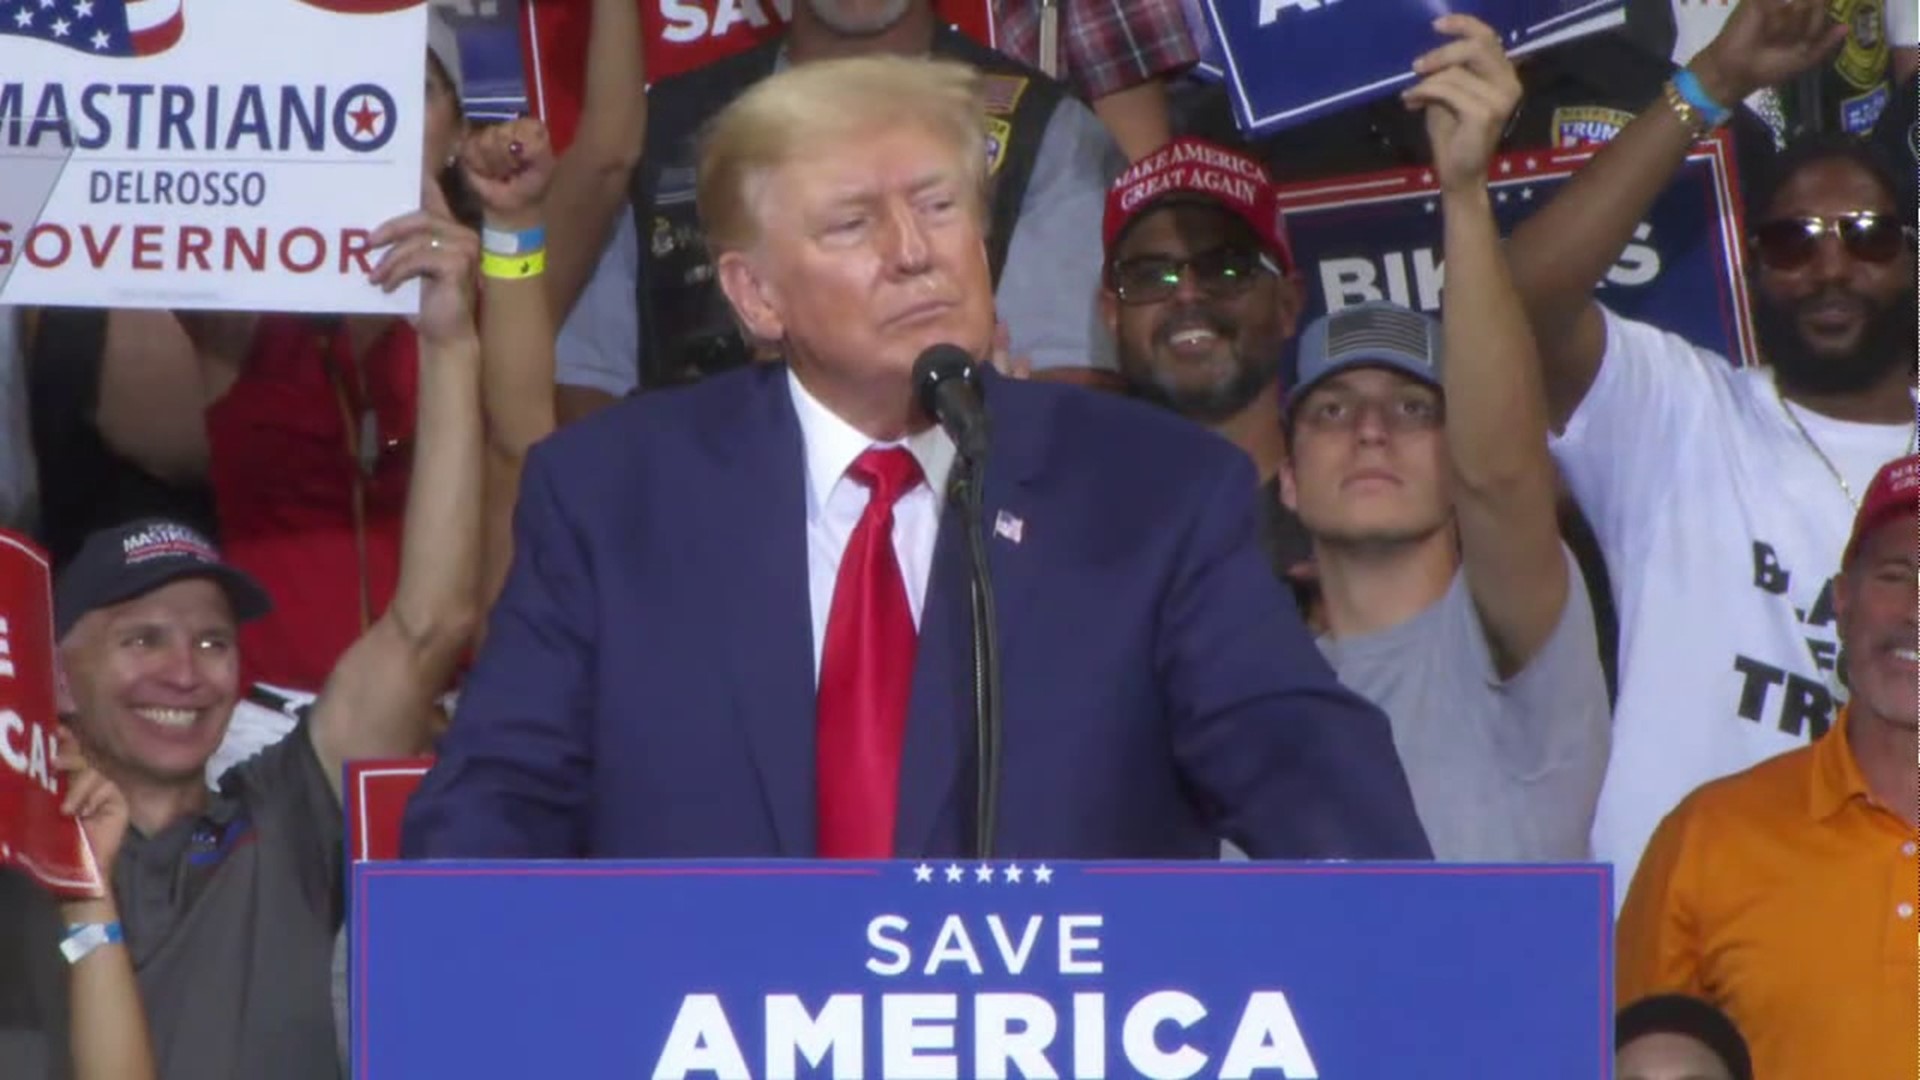 All eyes were on Luzerne County Saturday night as former President Trump hosted a 'Save America' rally in Wilkes-Barre Township.